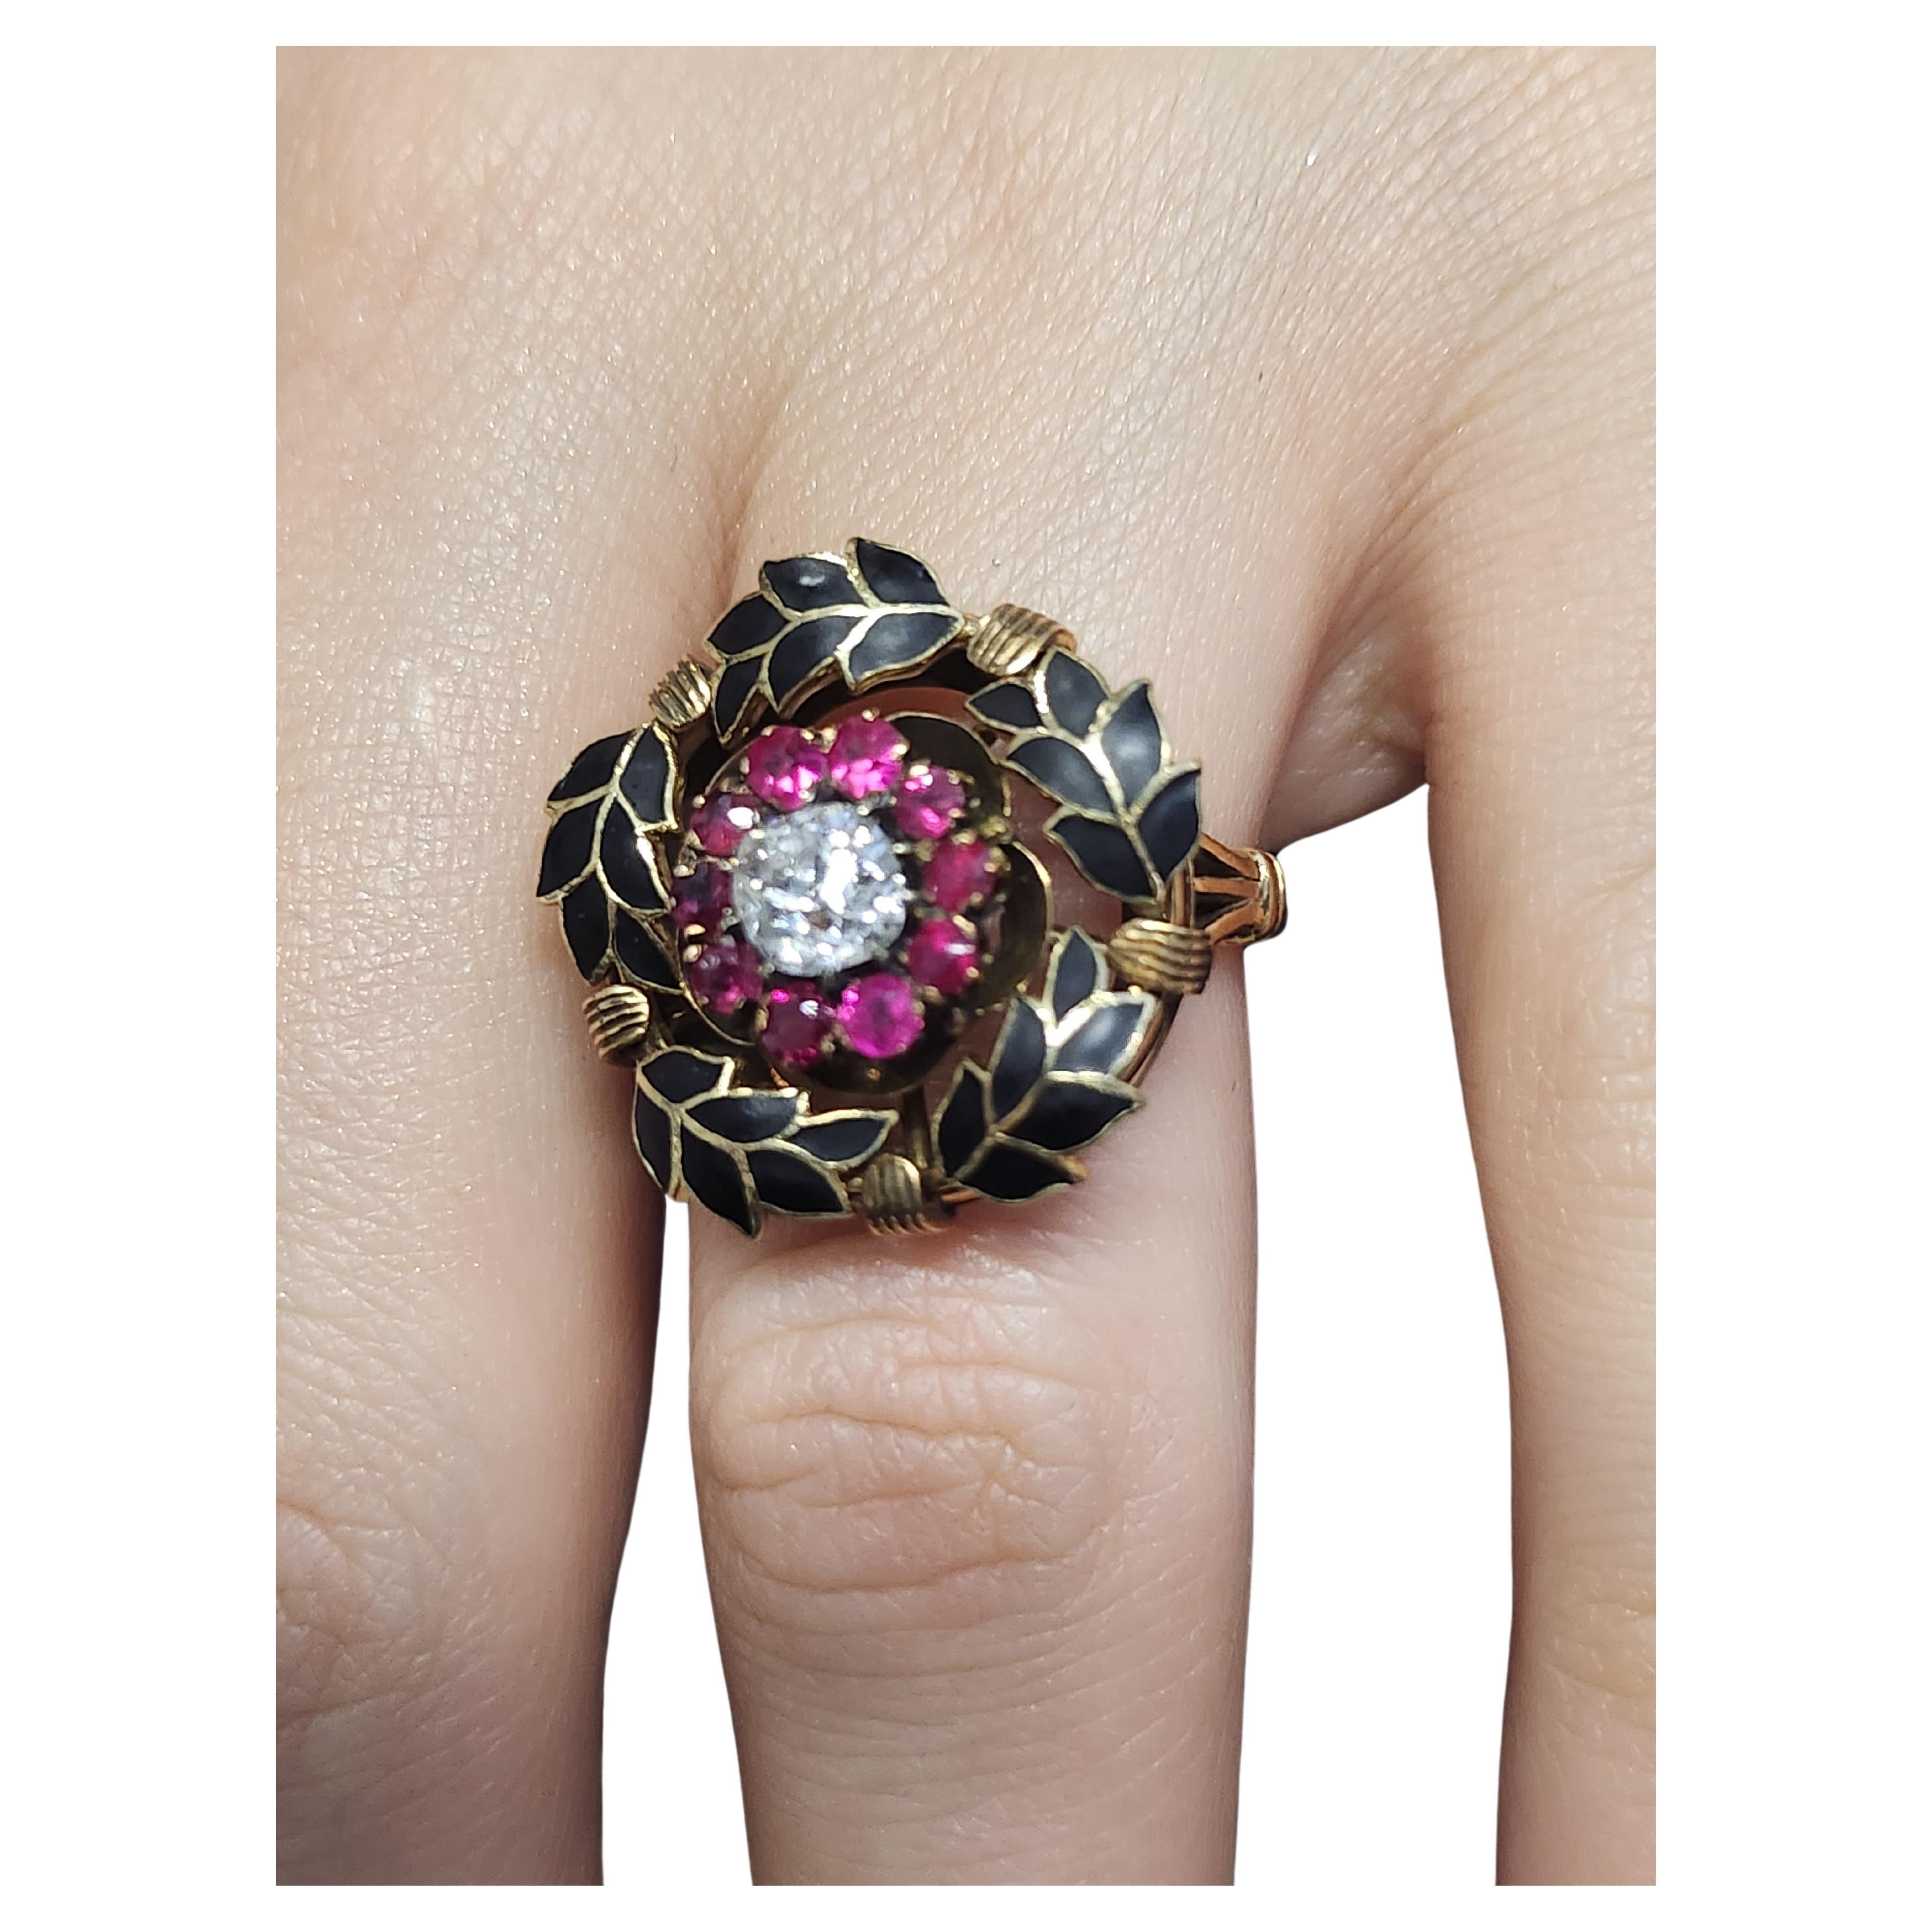 Antique 14k gold large heavy ring in black enamel olive branch ring head designe centered with old mine cut diamond estimate weight 0.50 carats H color white flanked with red ruby stones 